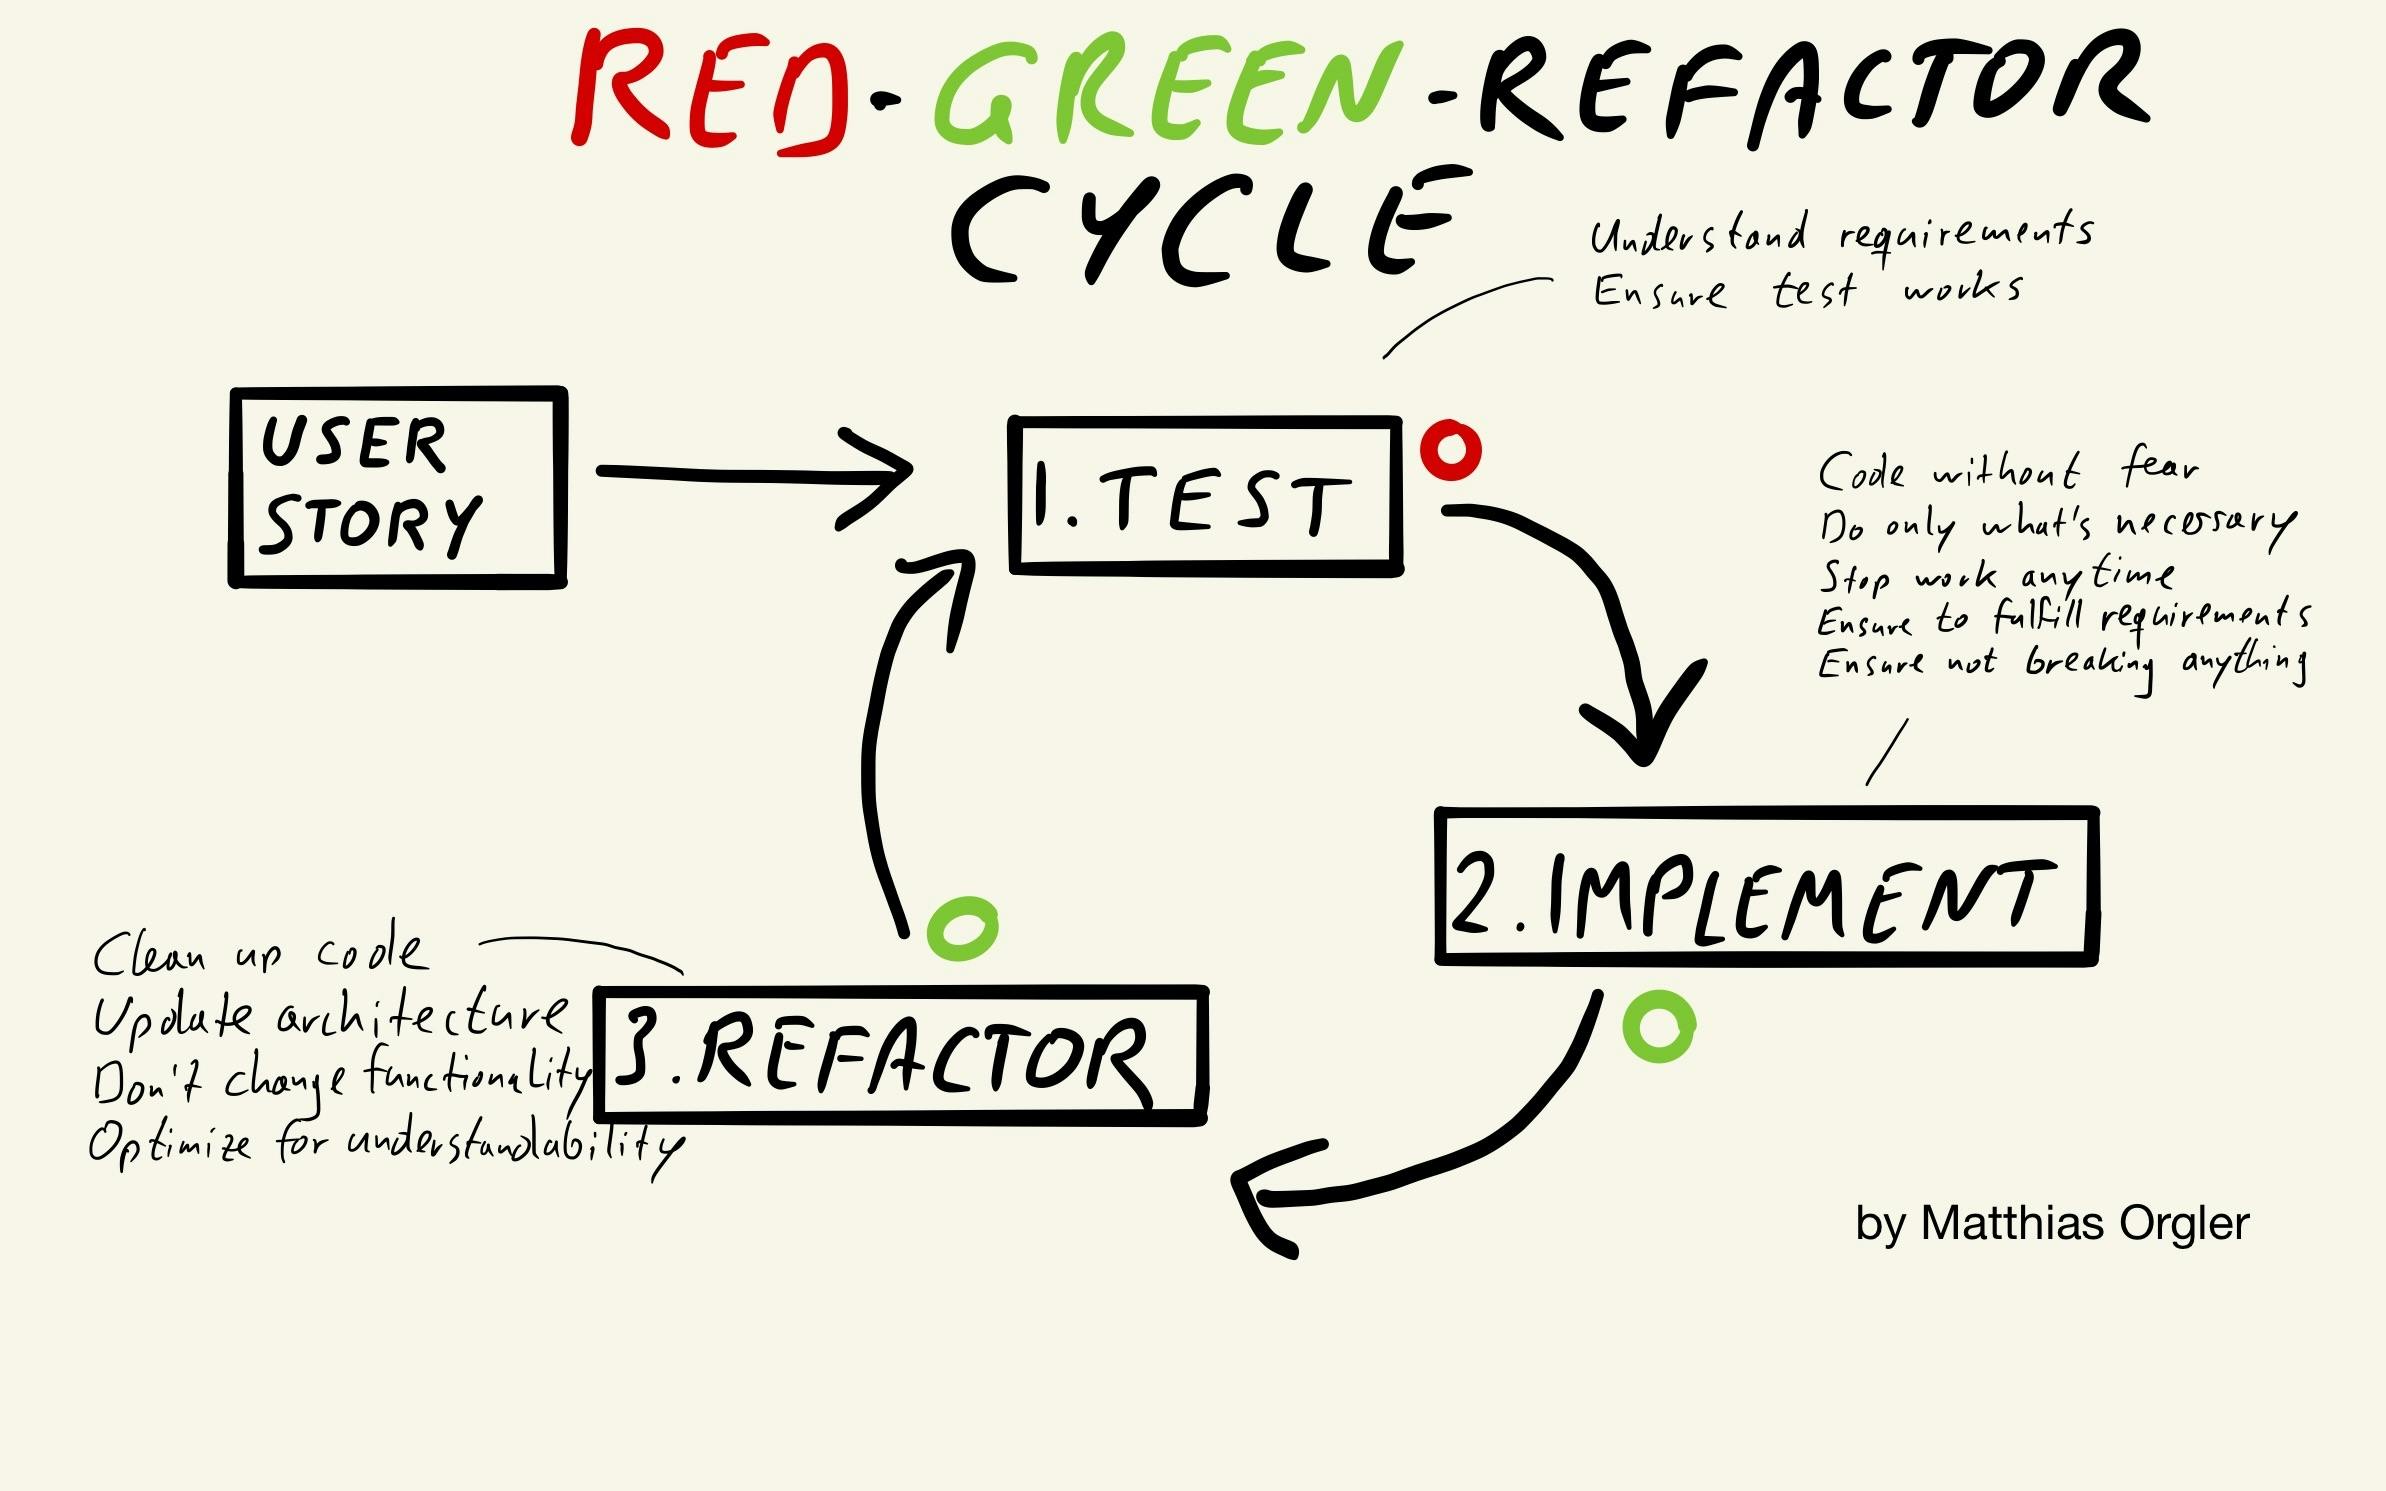 Red-green-refactor cycle in test-driven development (TDD)